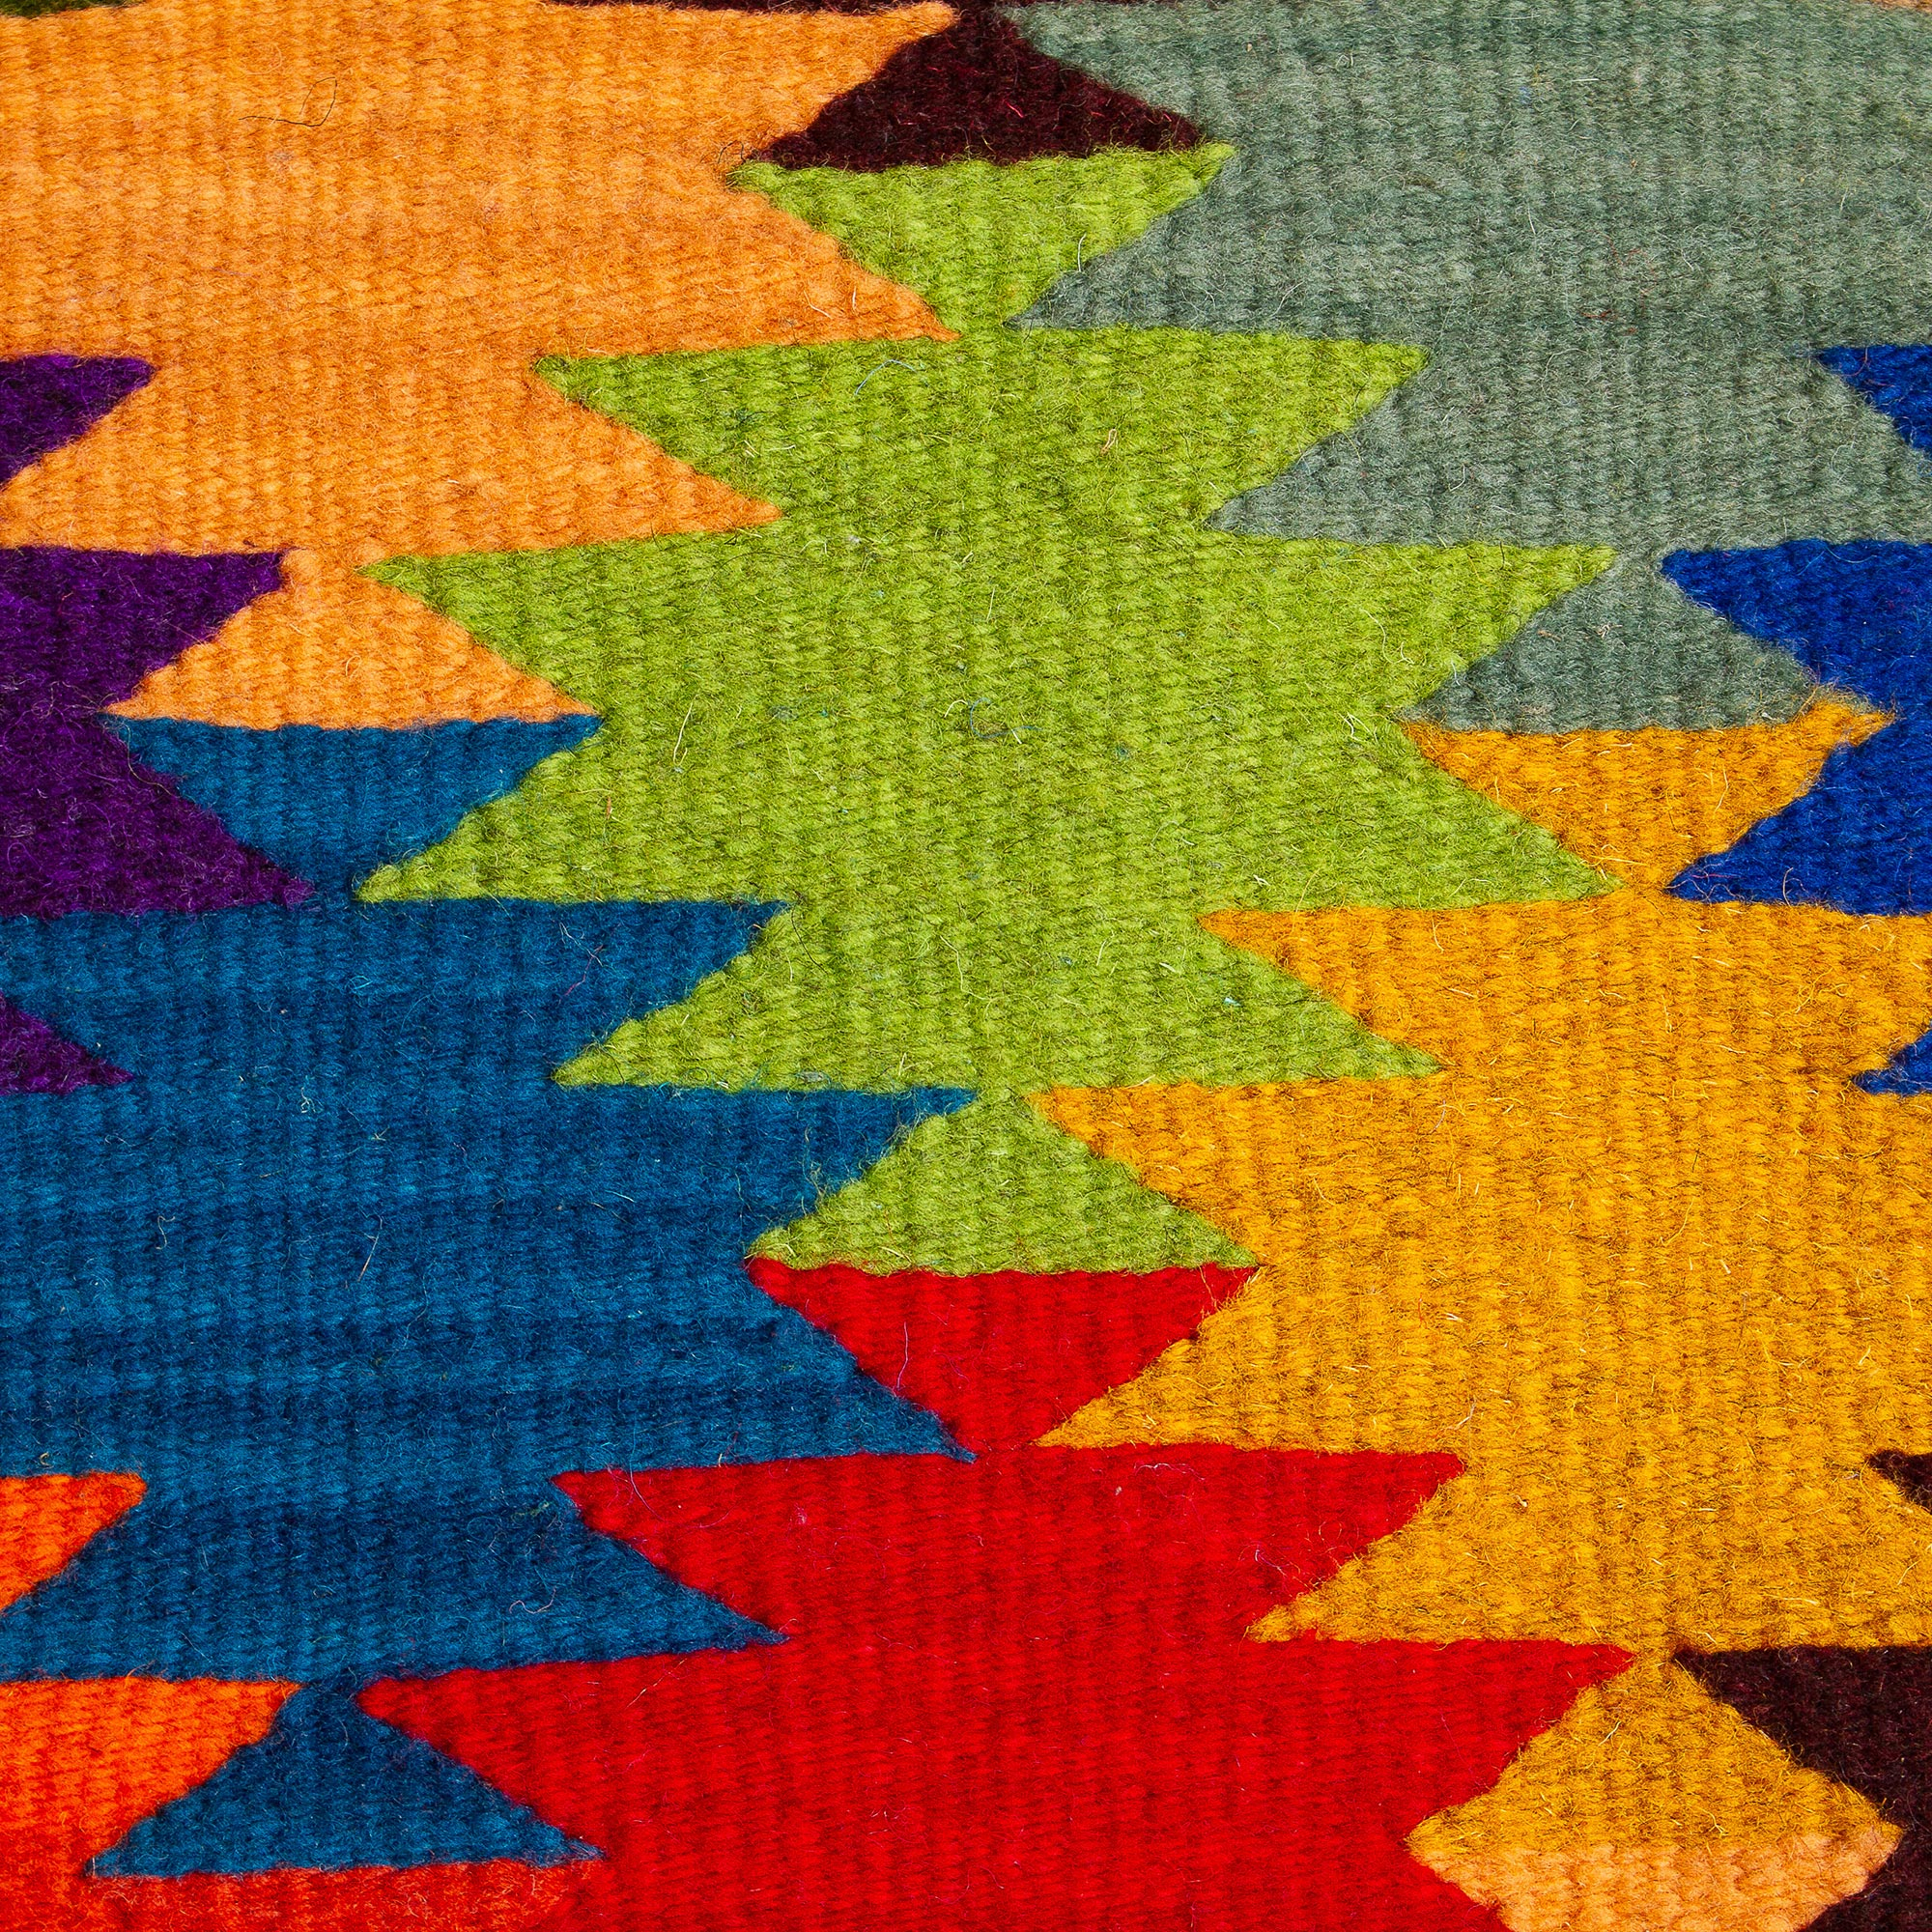 Hand Woven Colorful Wool Area Rug from Oaxaca - Endless Stars | NOVICA